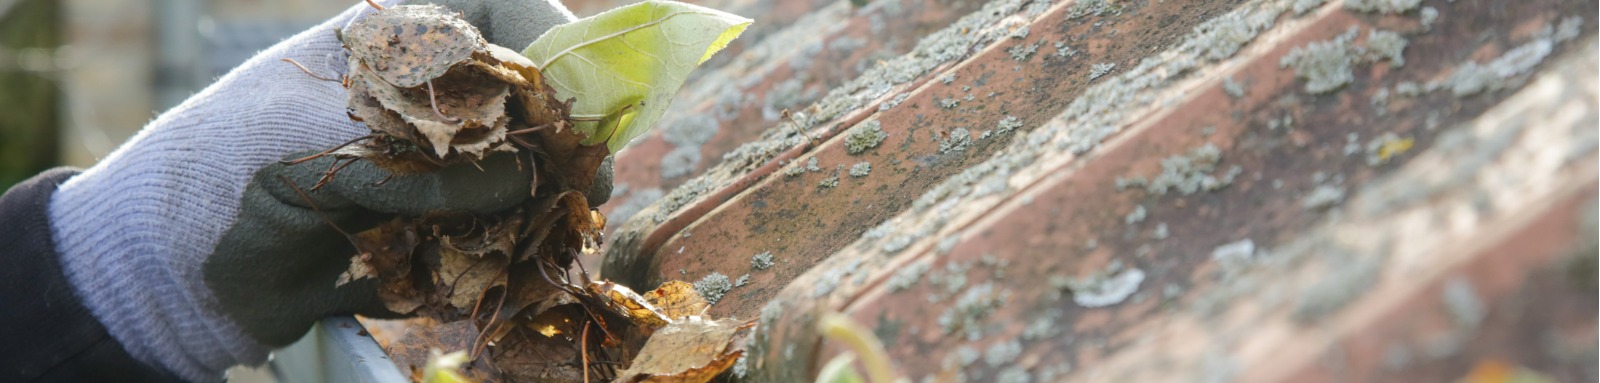 A gloved hand pulling leaves from a roof gutter